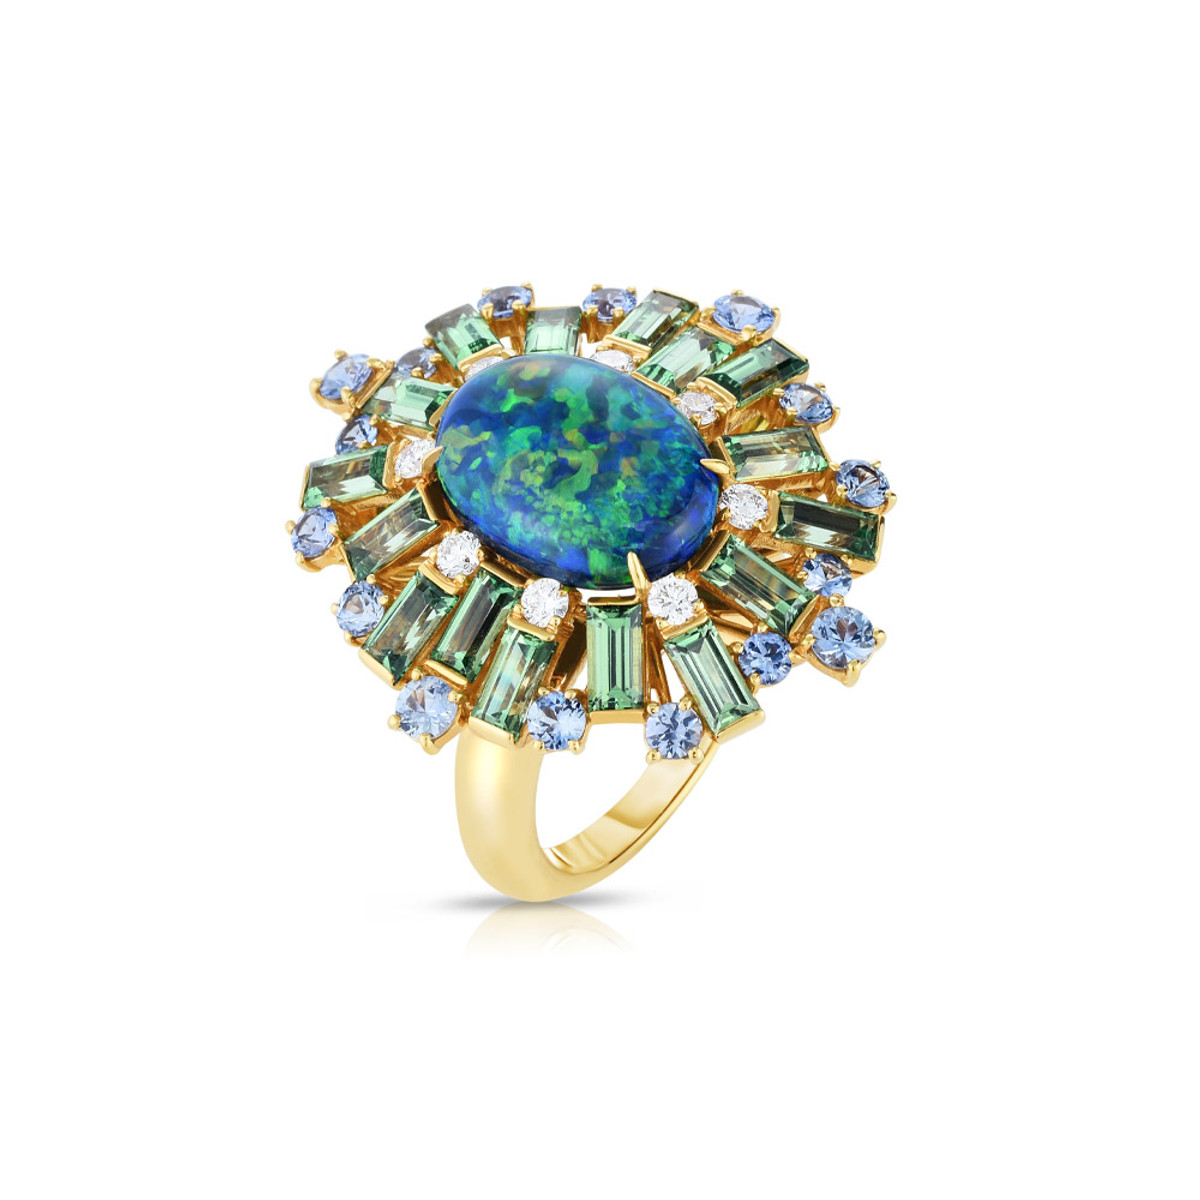 Hyde Park Collection 18K Yellow Gold Opal, Tsavorite, Sapphire and Diamond Ring-46979 Product Image